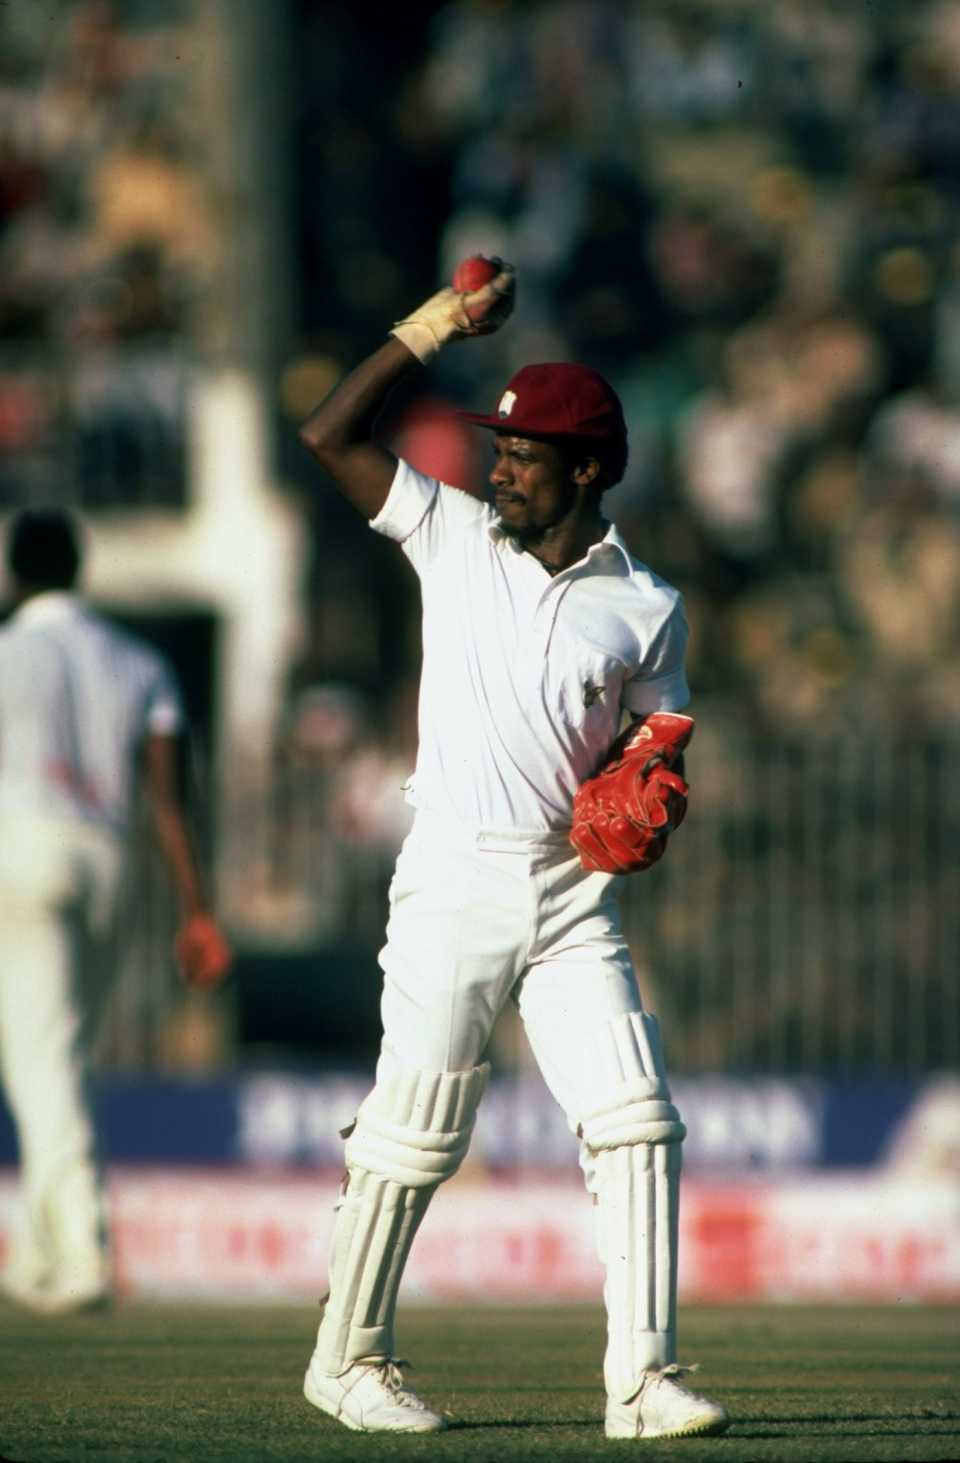 David Murray in action during the second Test against Pakistan in Faisalabad in 1980